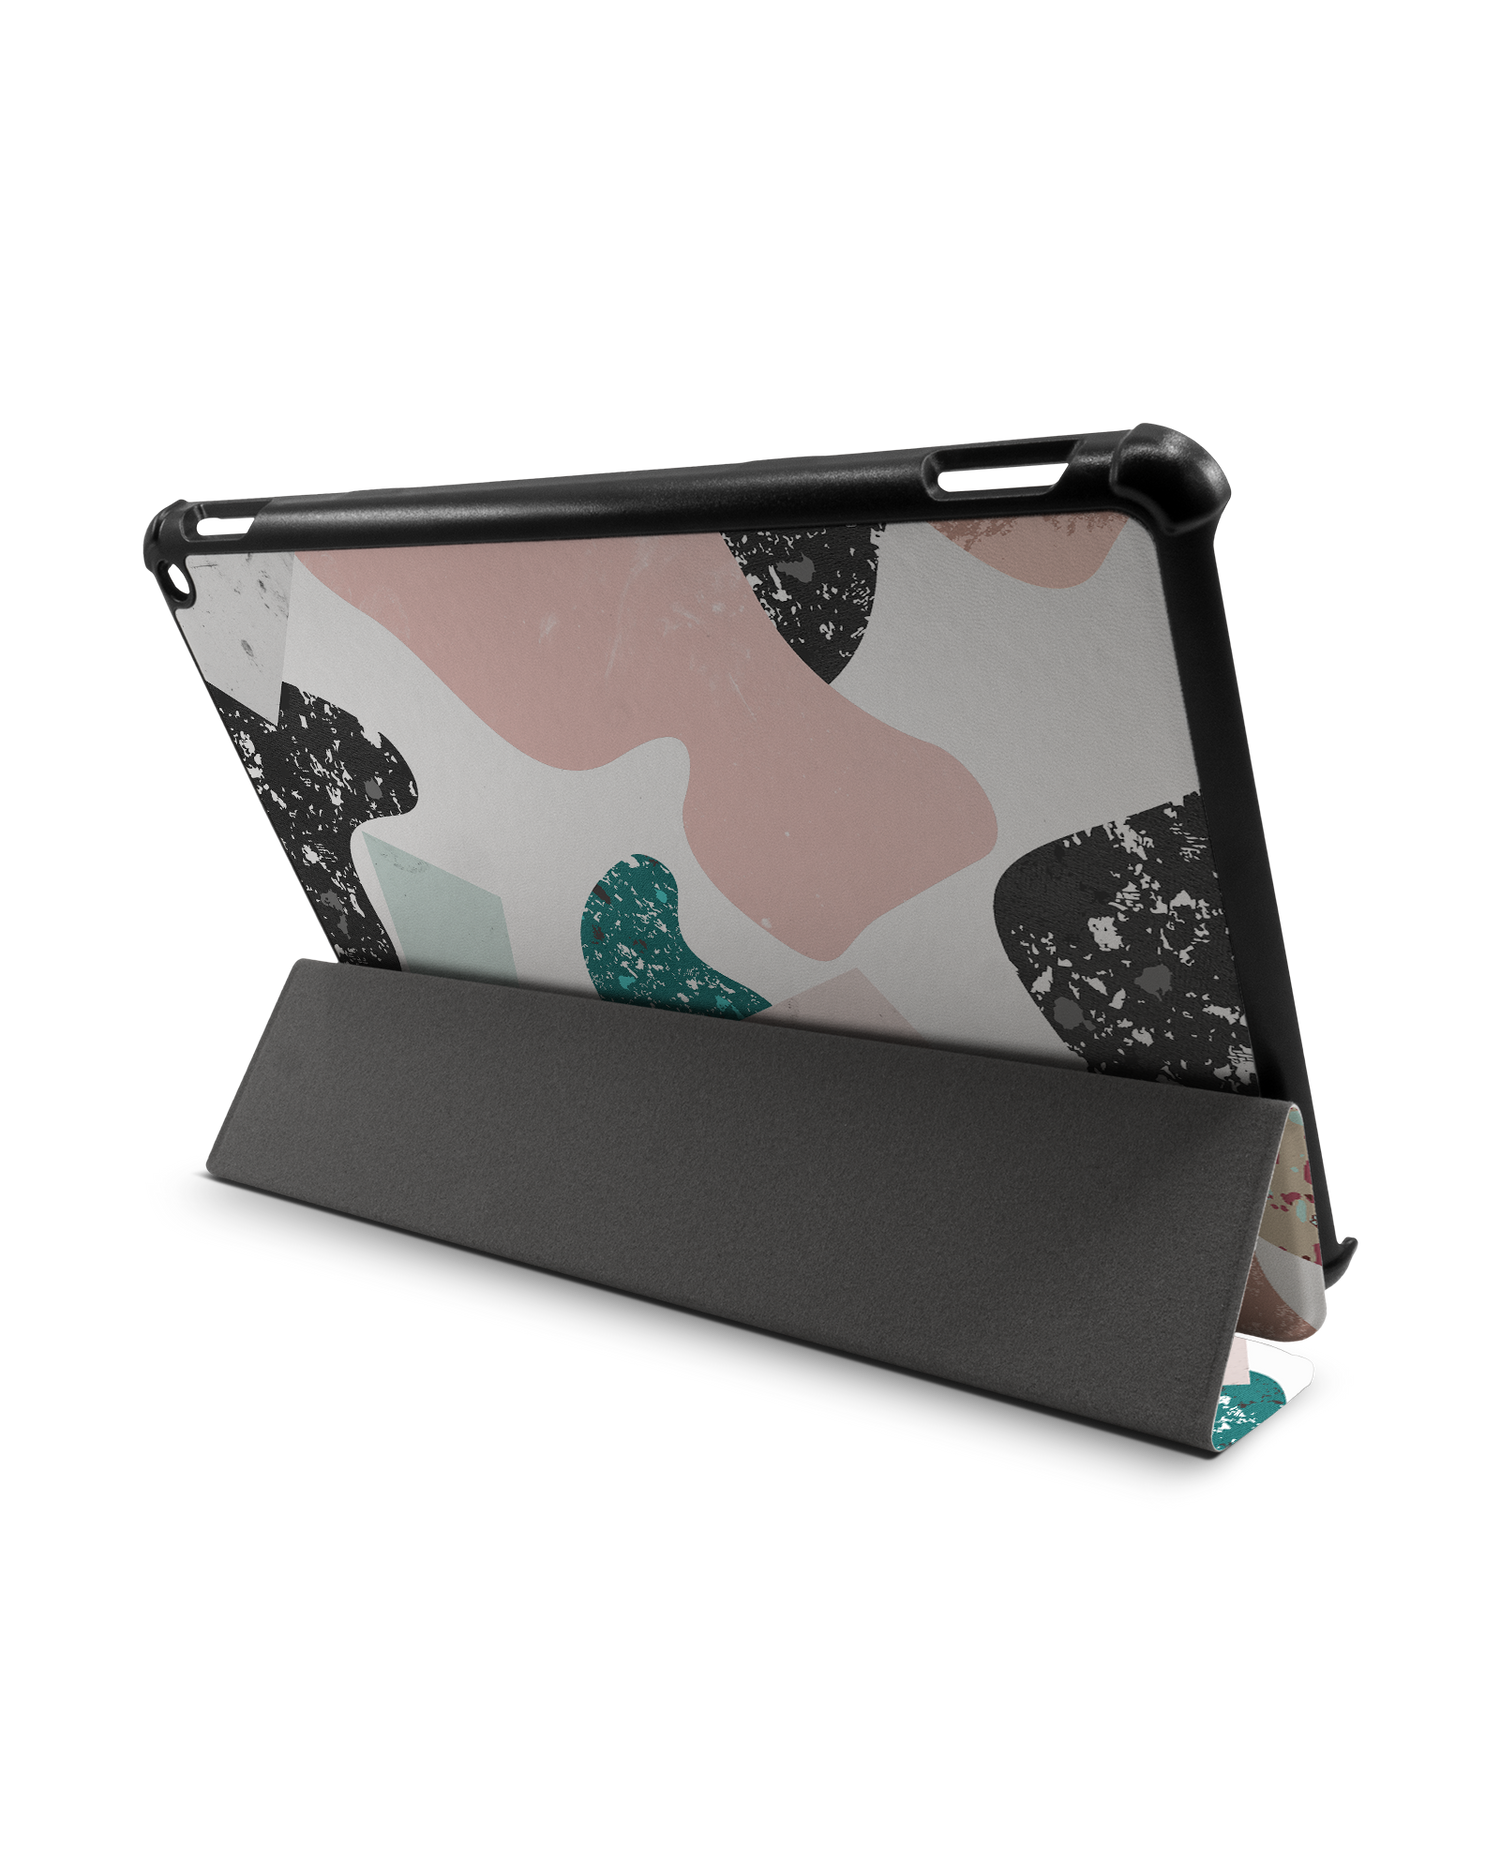 Scattered Shapes Tablet Smart Case for Amazon Fire HD 10 (2021): Used as Stand